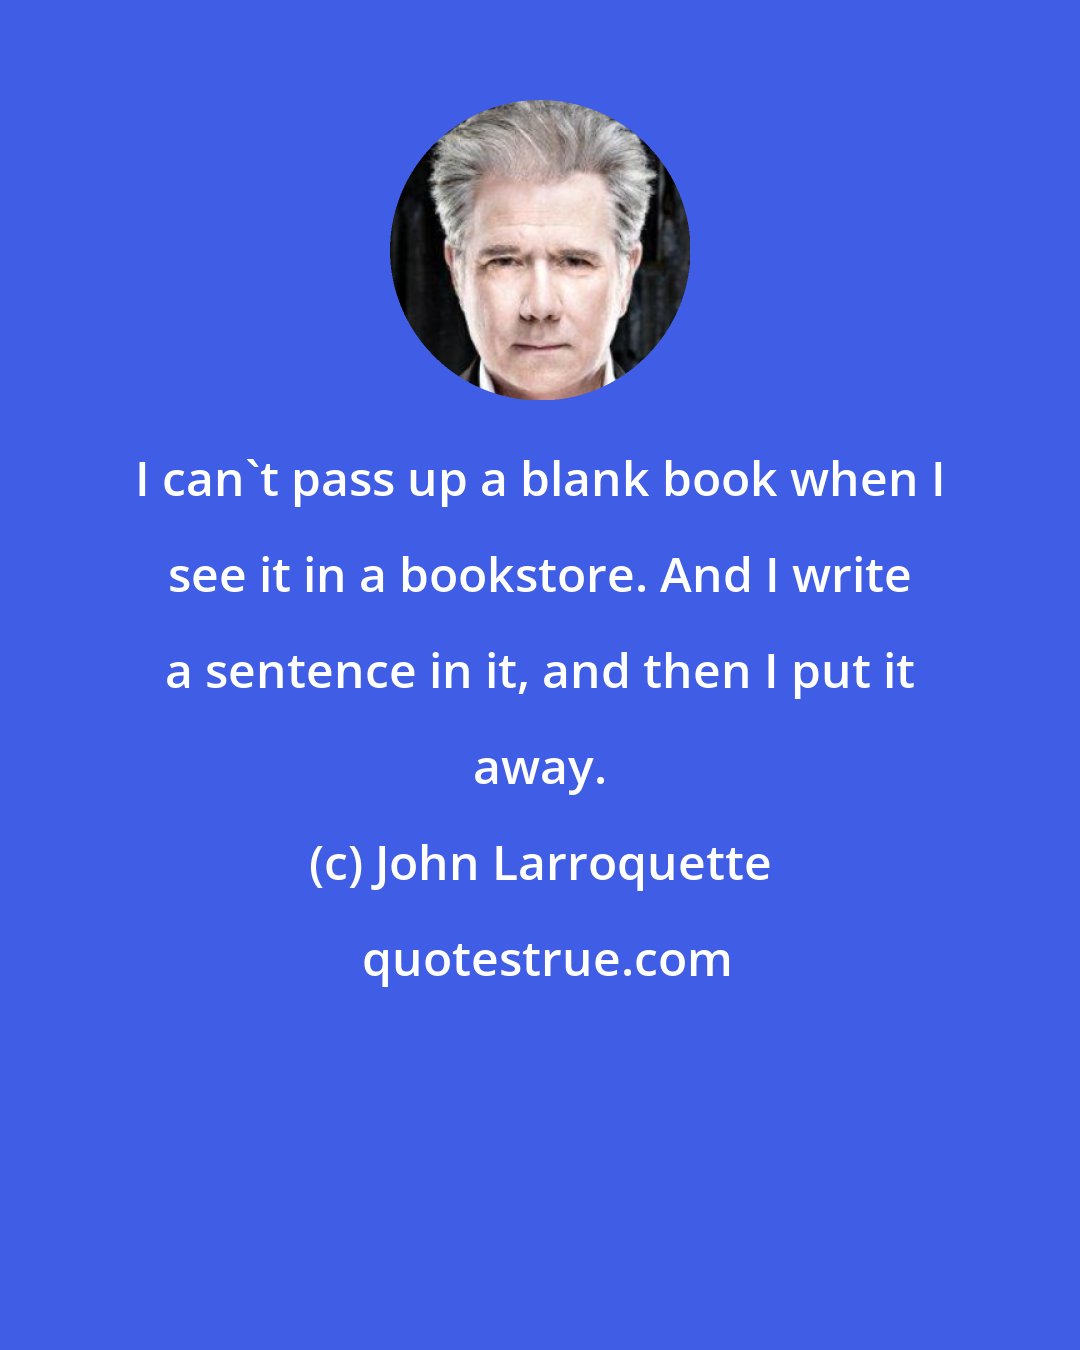 John Larroquette: I can't pass up a blank book when I see it in a bookstore. And I write a sentence in it, and then I put it away.